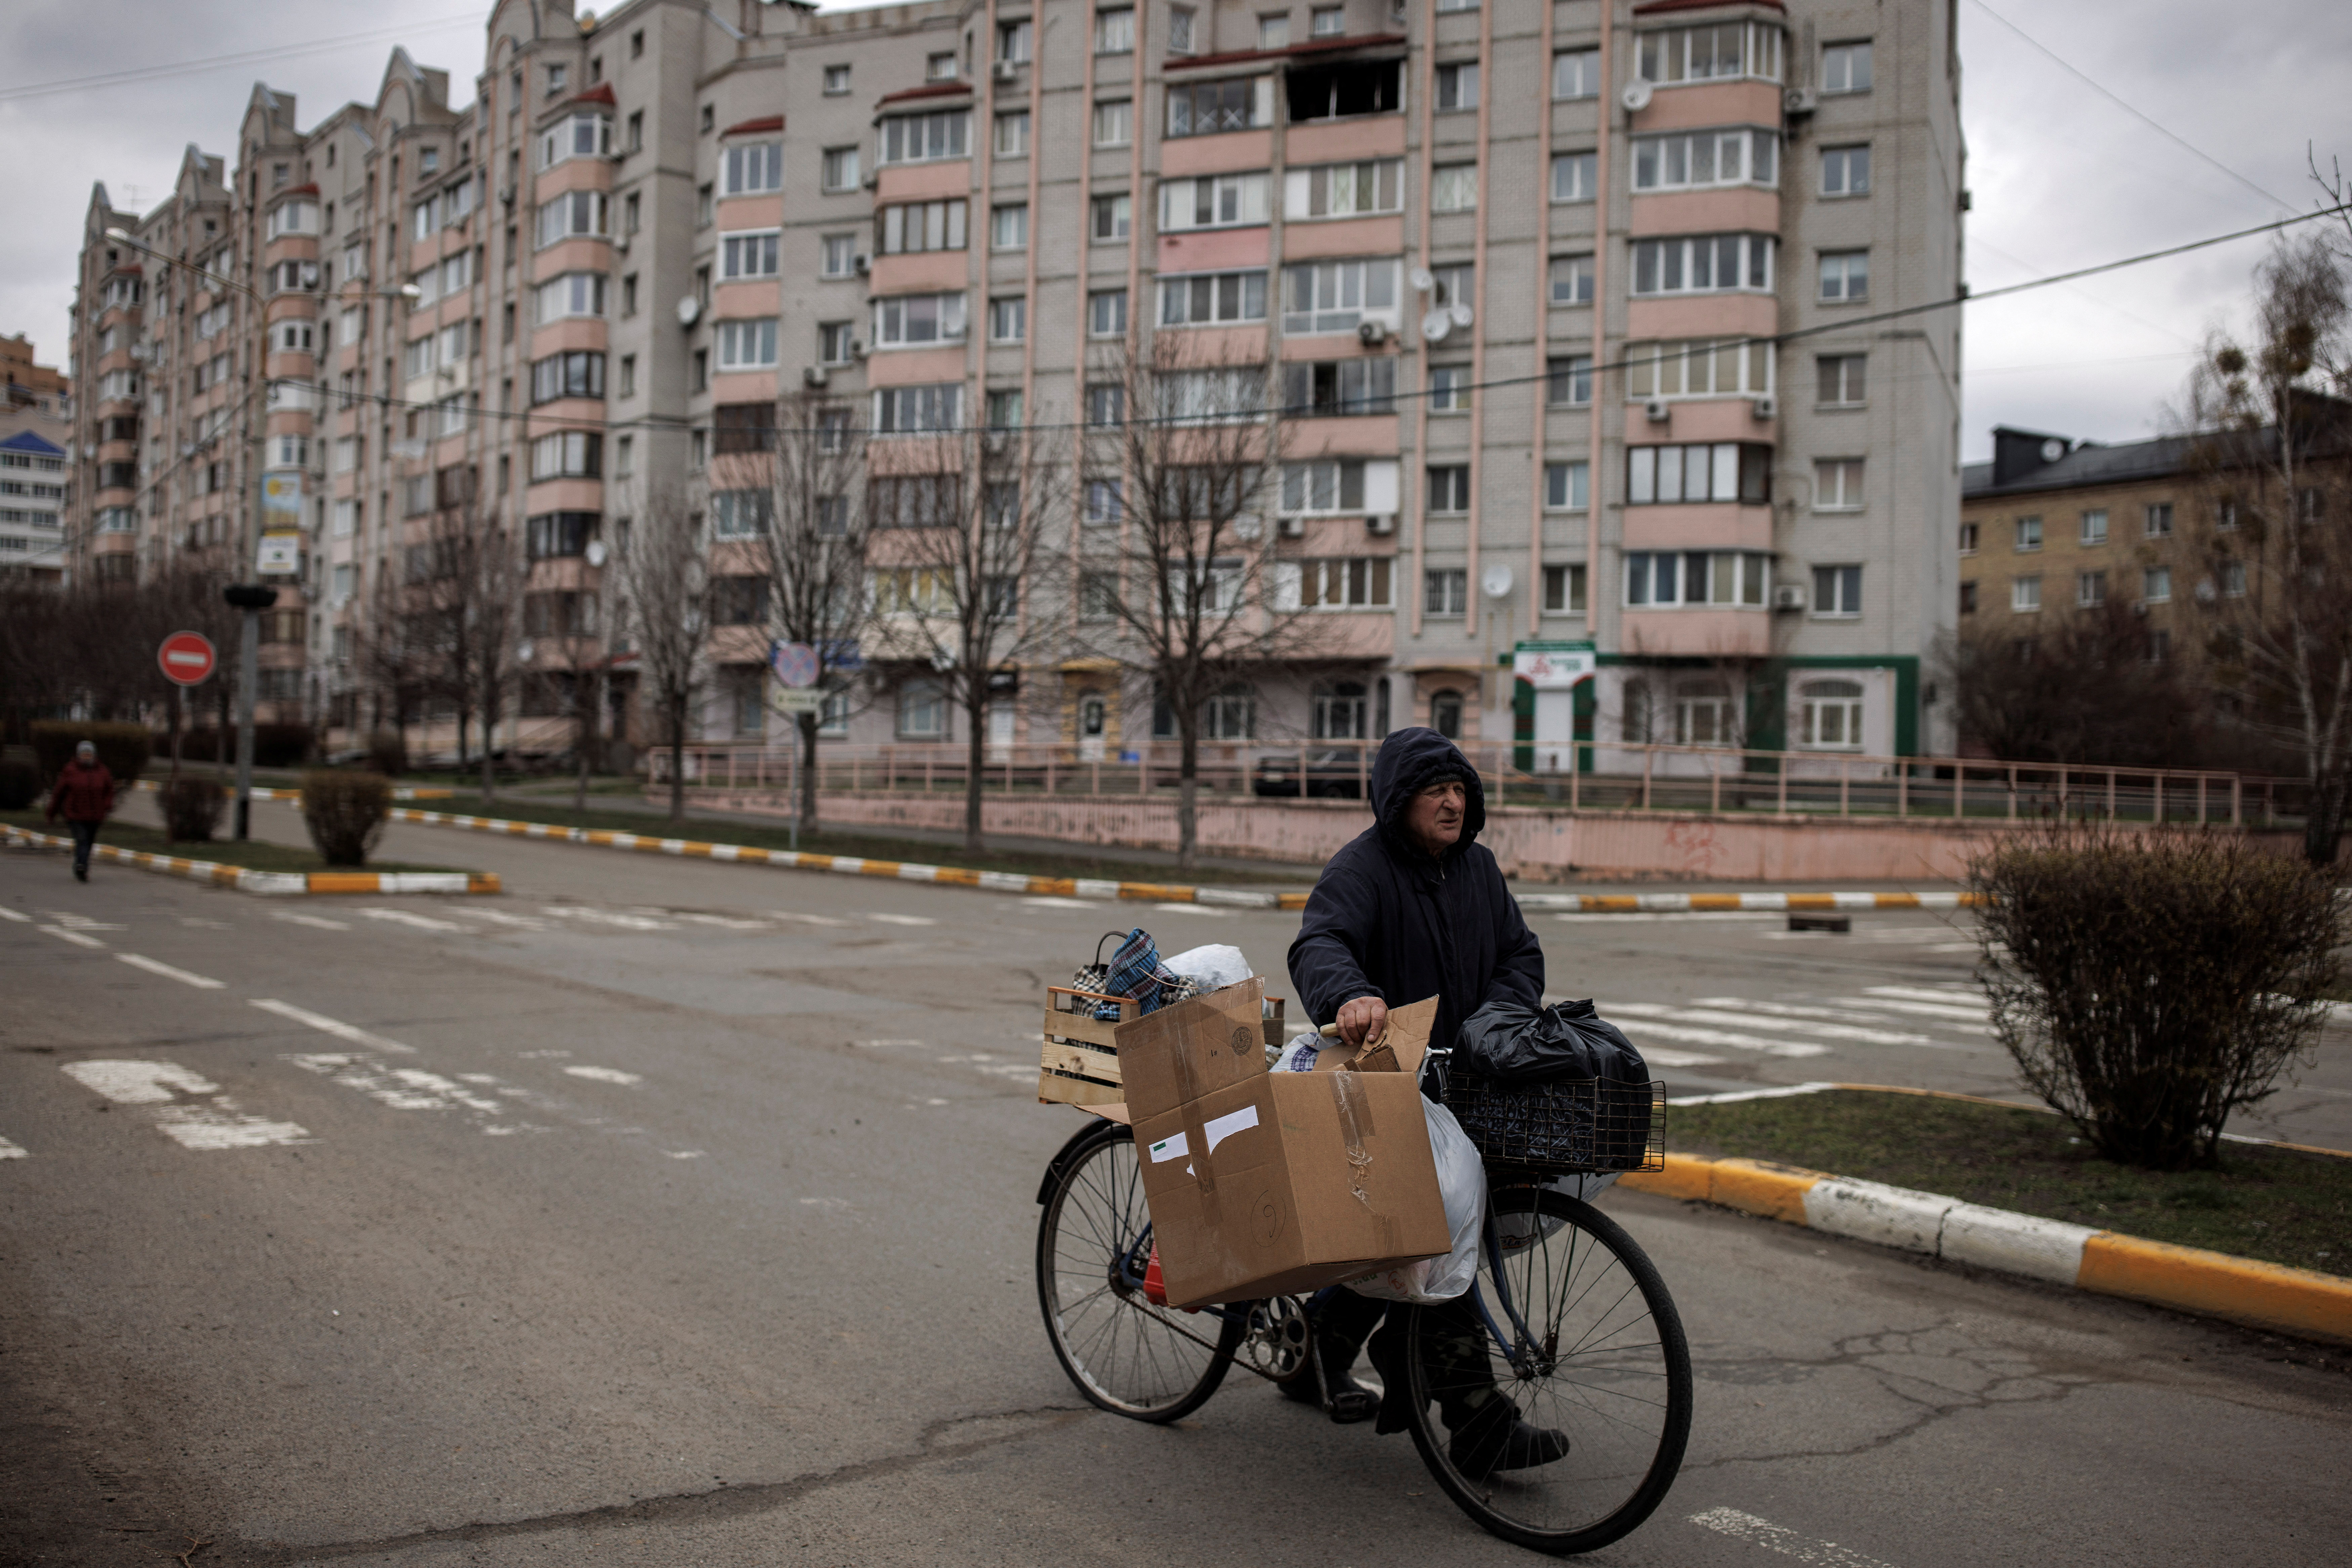 Man pushes his bicycle, amid Russia's invasion on Ukraine, in Bucha